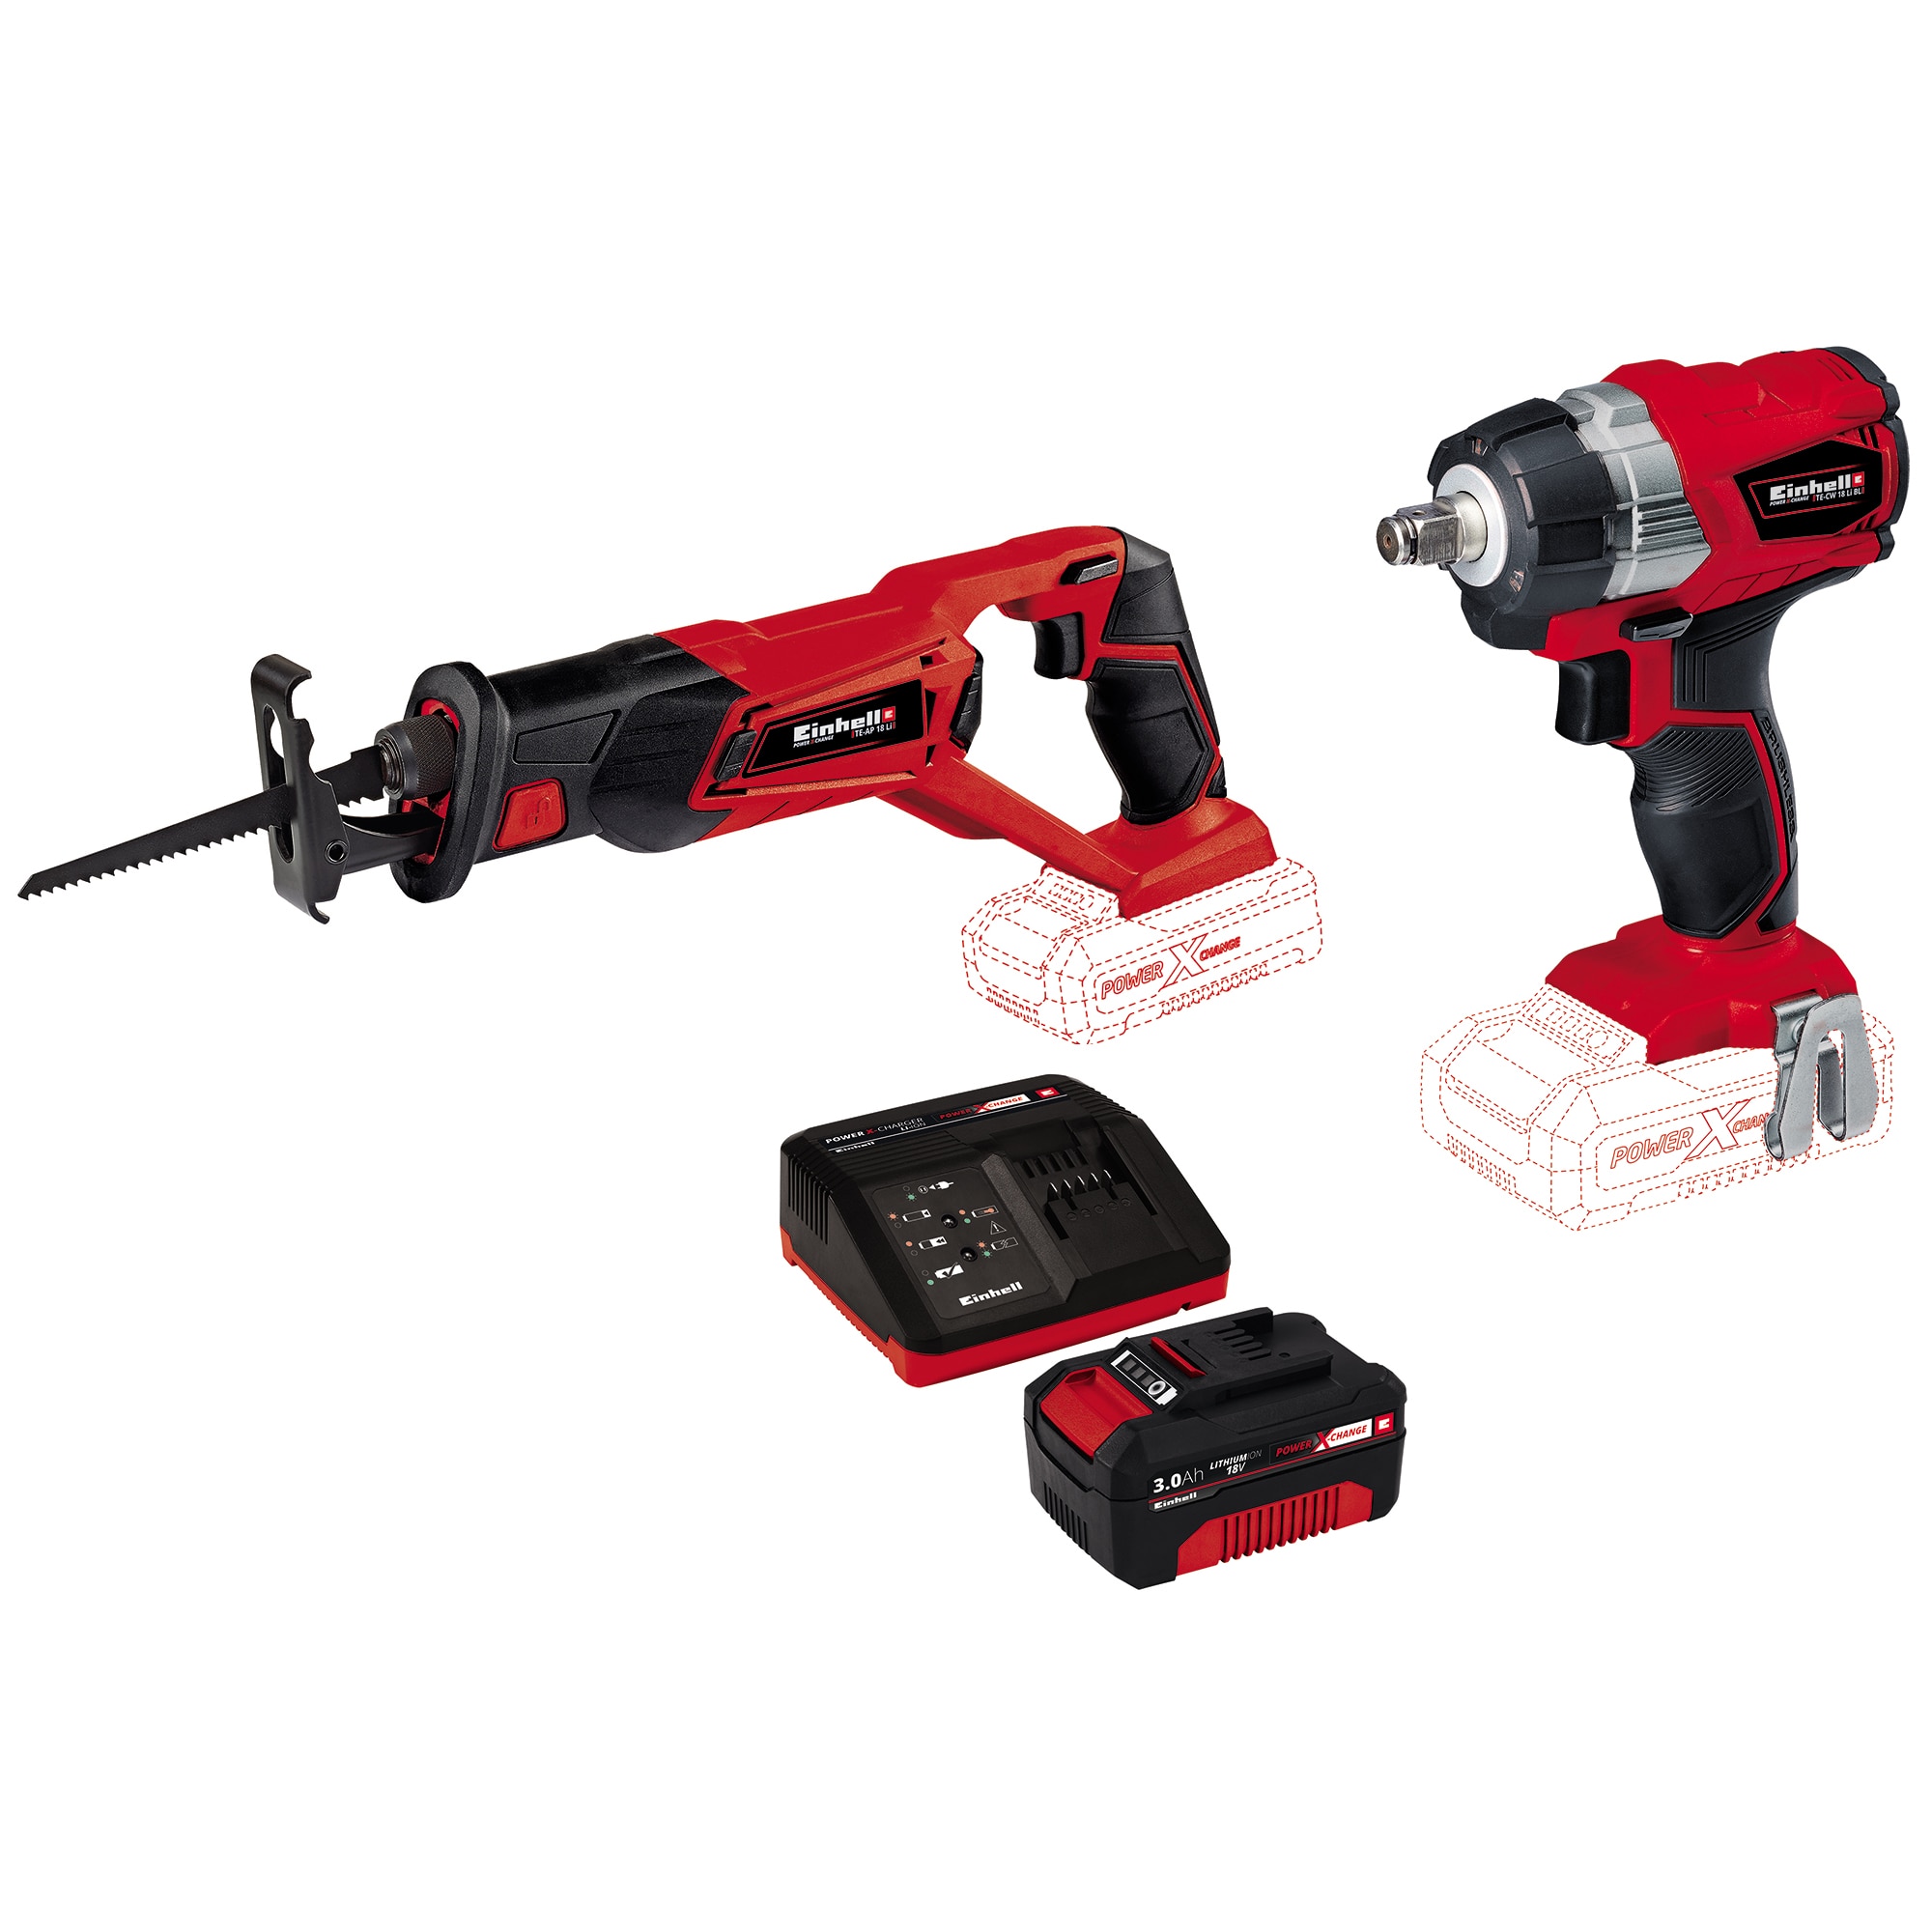 Pack EINHELL 18V Power X-Change - Scie sabre universelle - TE-AP